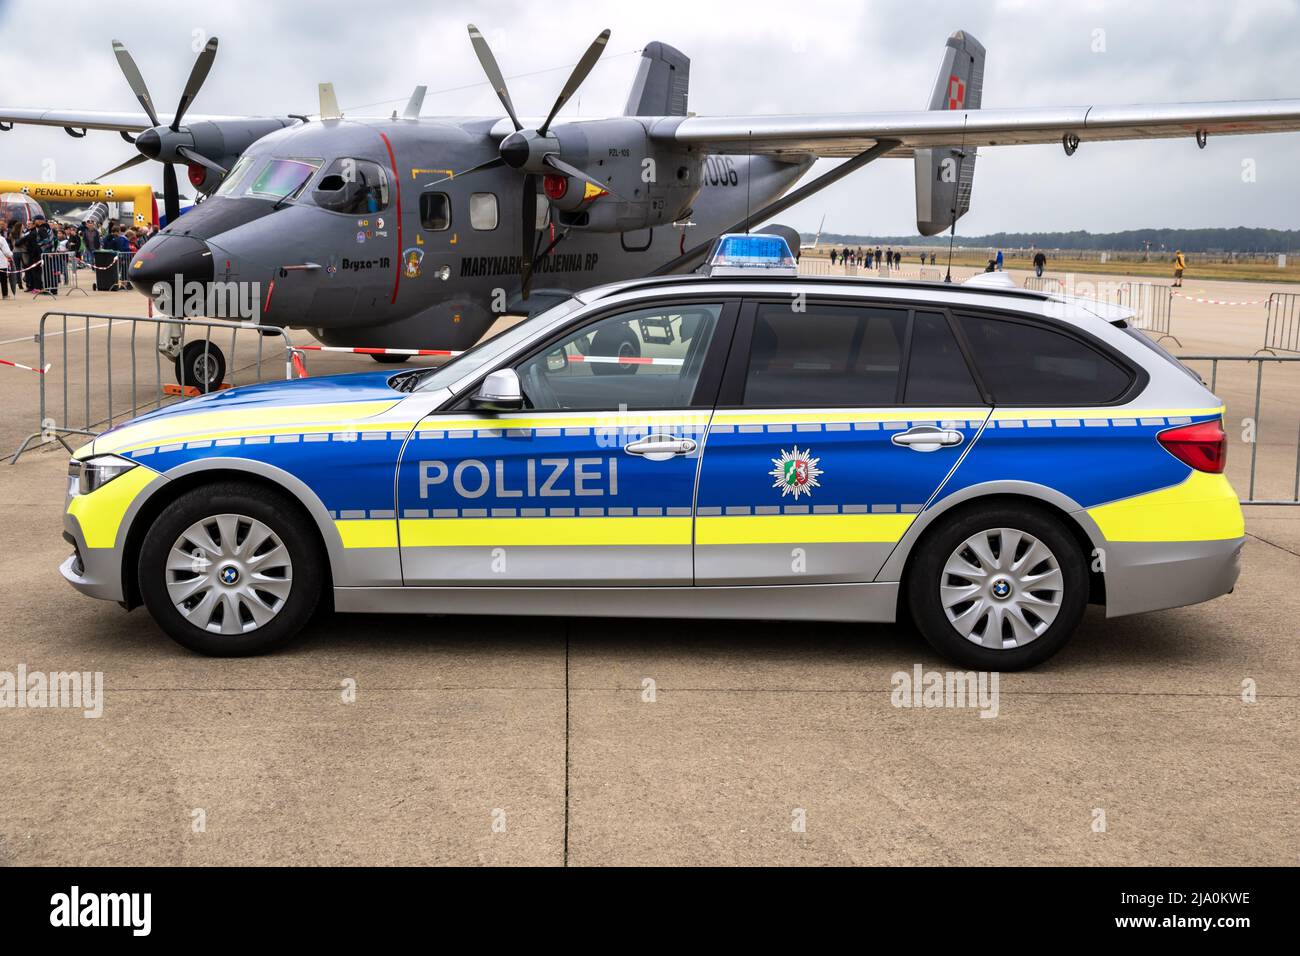 BMW 318d Touring of the German Police of Nordrhein-Westfalen in front of a Polish Navy M28 Skytruck at NATO base Geilenkirchen. Germany - July 2, 2017 Stock Photo